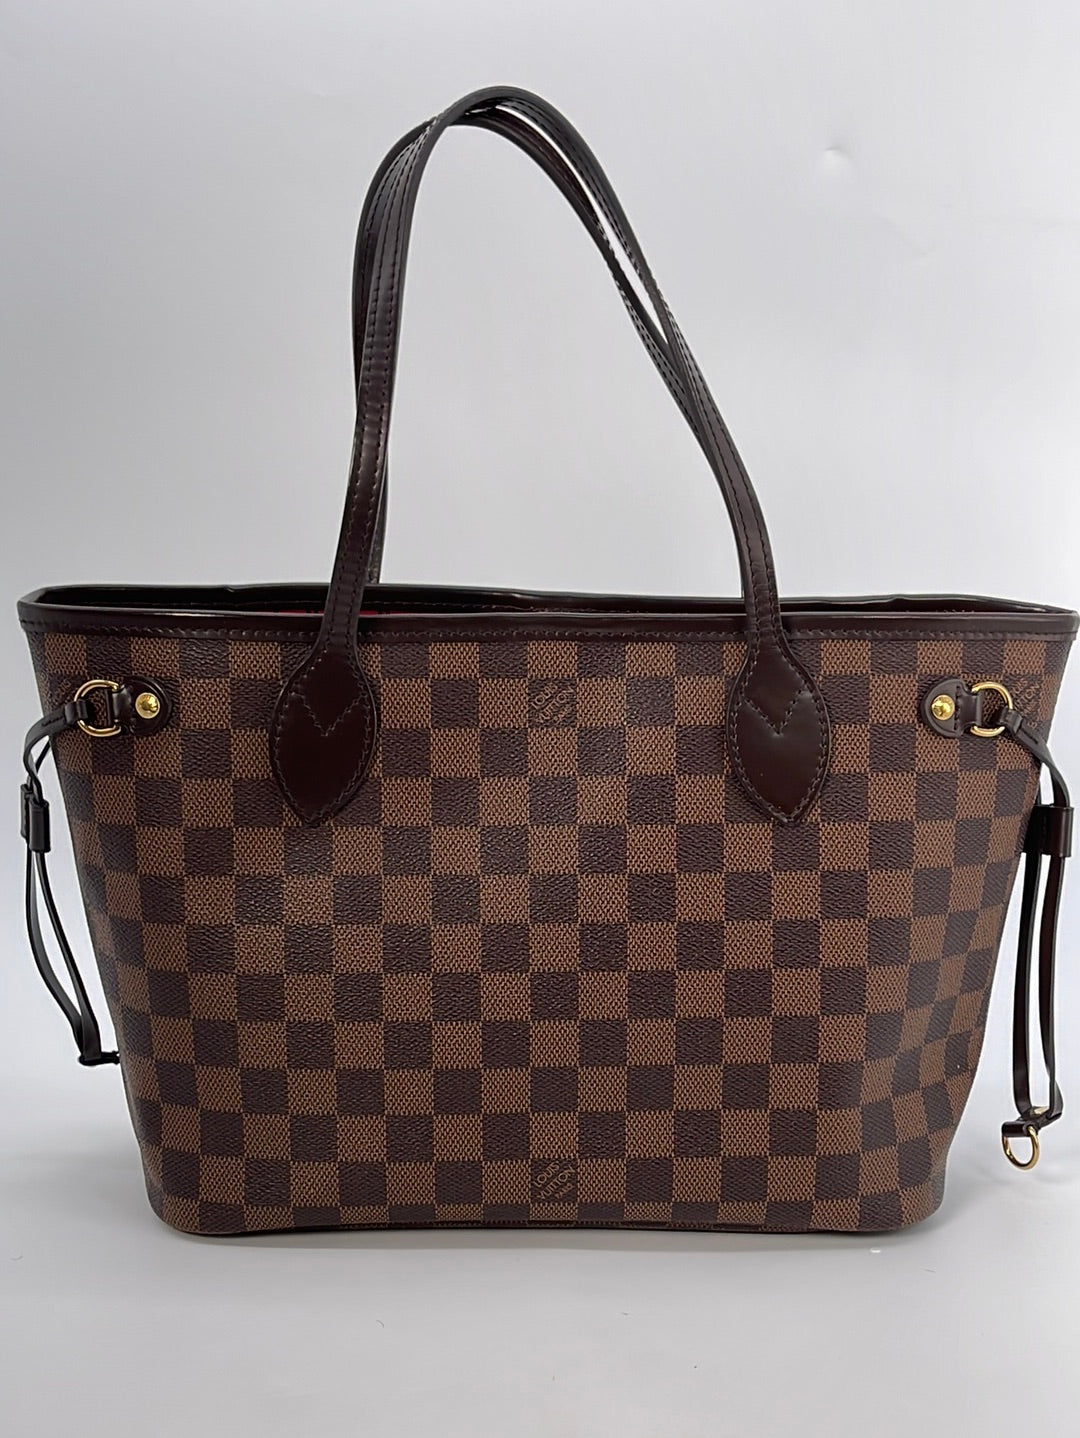 Louis Vuitton Damier Ebene Neverfull PM w/ Pouch - Brown Totes